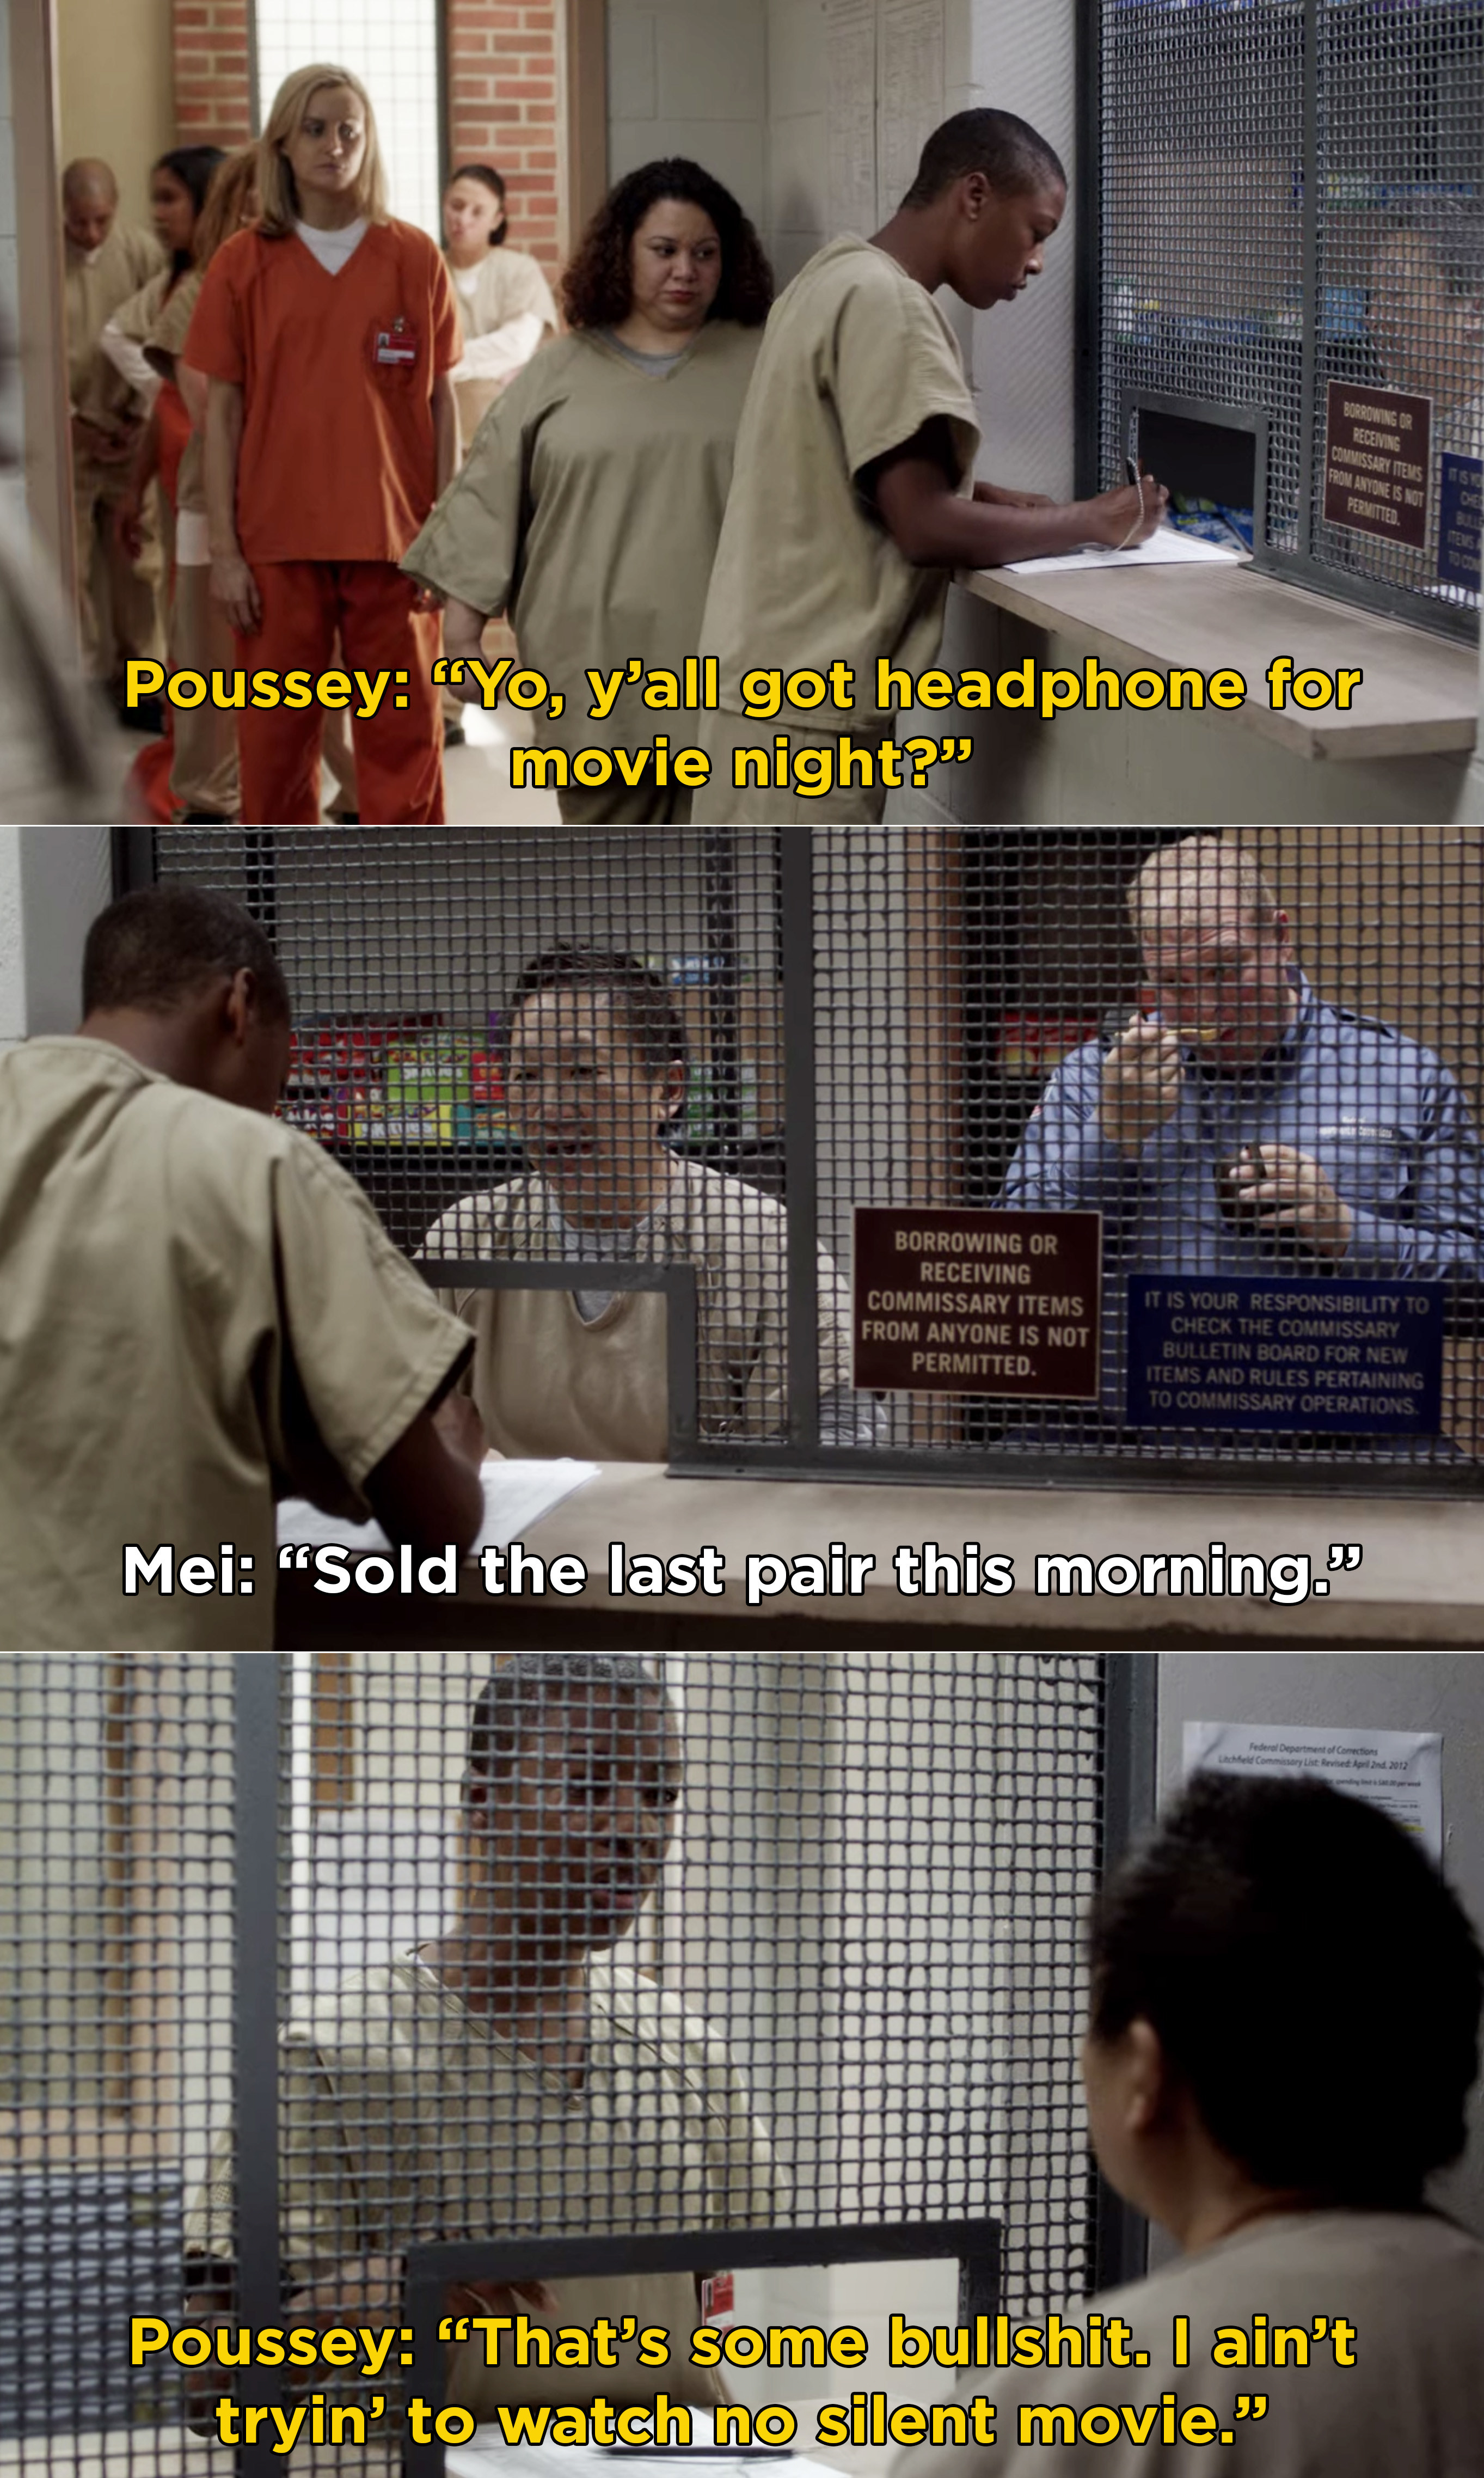 Poussey trying to buy headphones for movie night, but they are sold out